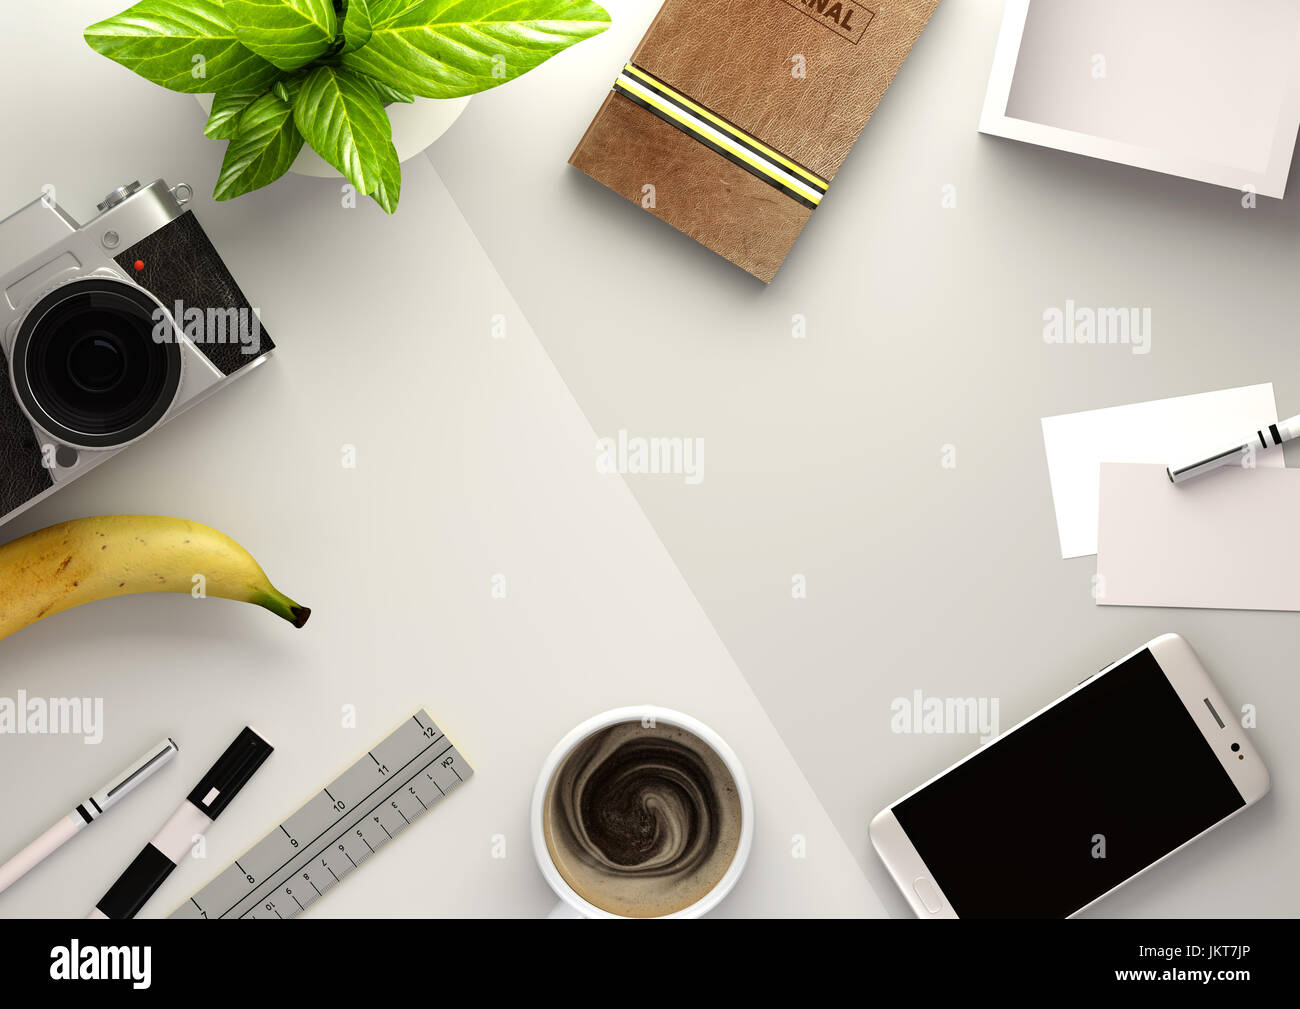 Top down view of a business desktop with a smartphone, office accessories,a journal, coffee and snacks. 3D illustration render. Stock Photo